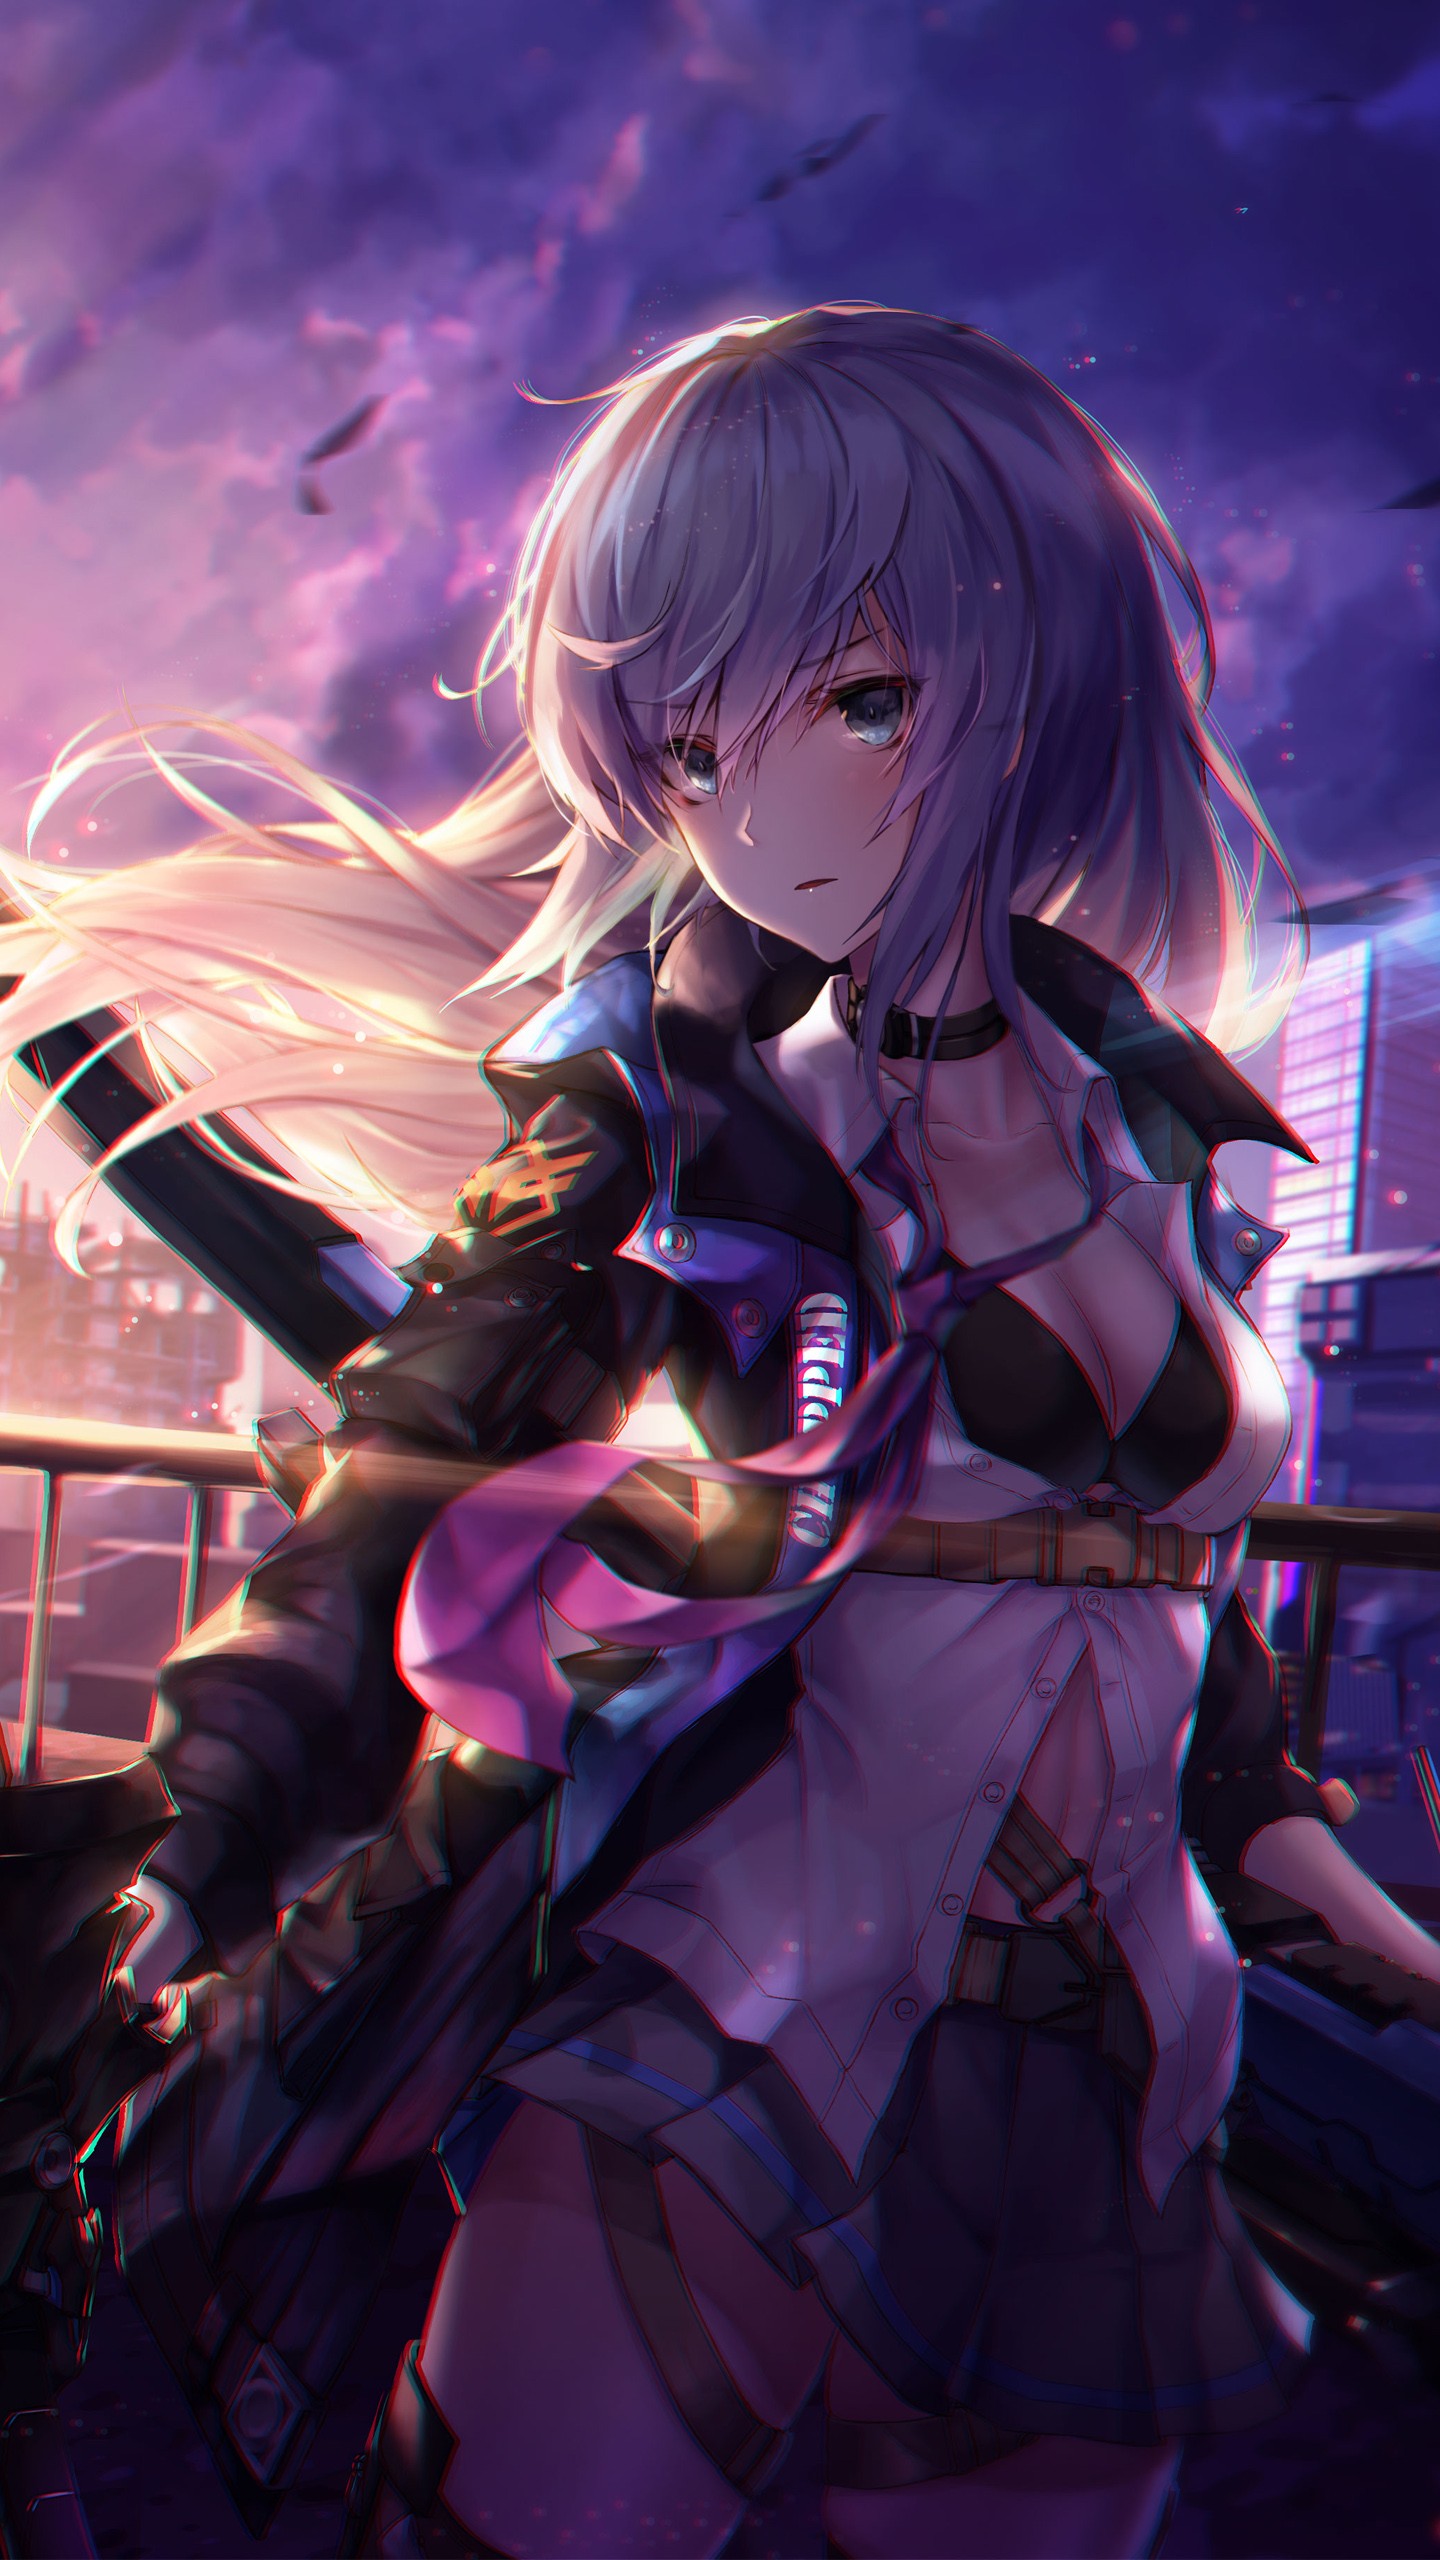 🔥 #dark badass anime wallpaper - android / iphone hd wallpaper background  download HD Photos & Wallpapers (0+ Images) - Page: 1